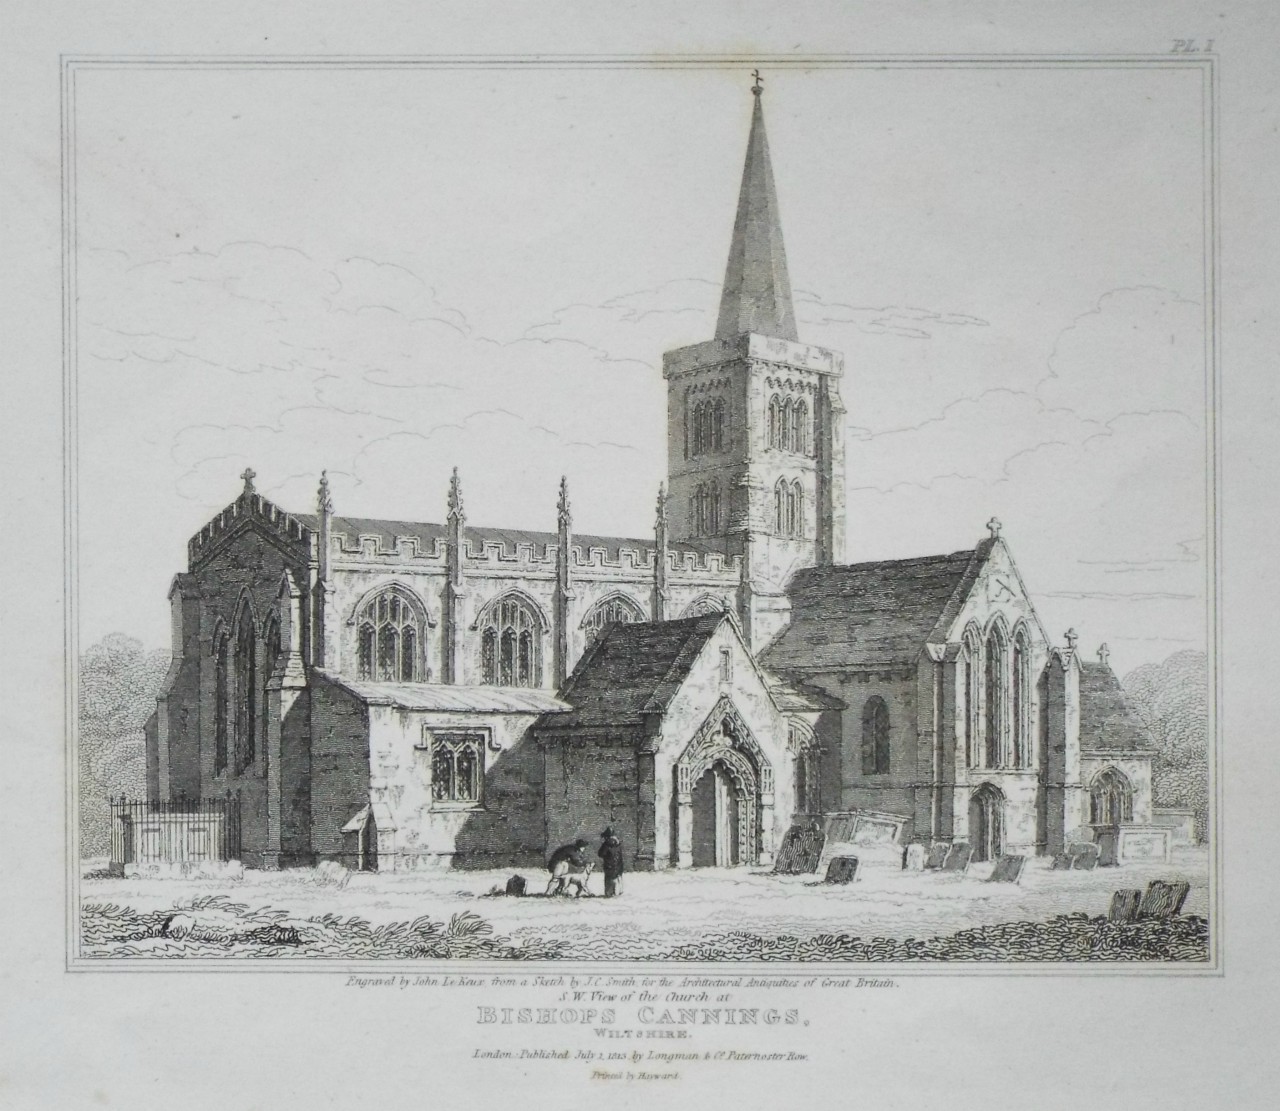 Print - S.W. View of the Church at Bishops Cannings, Wiltshire - Le